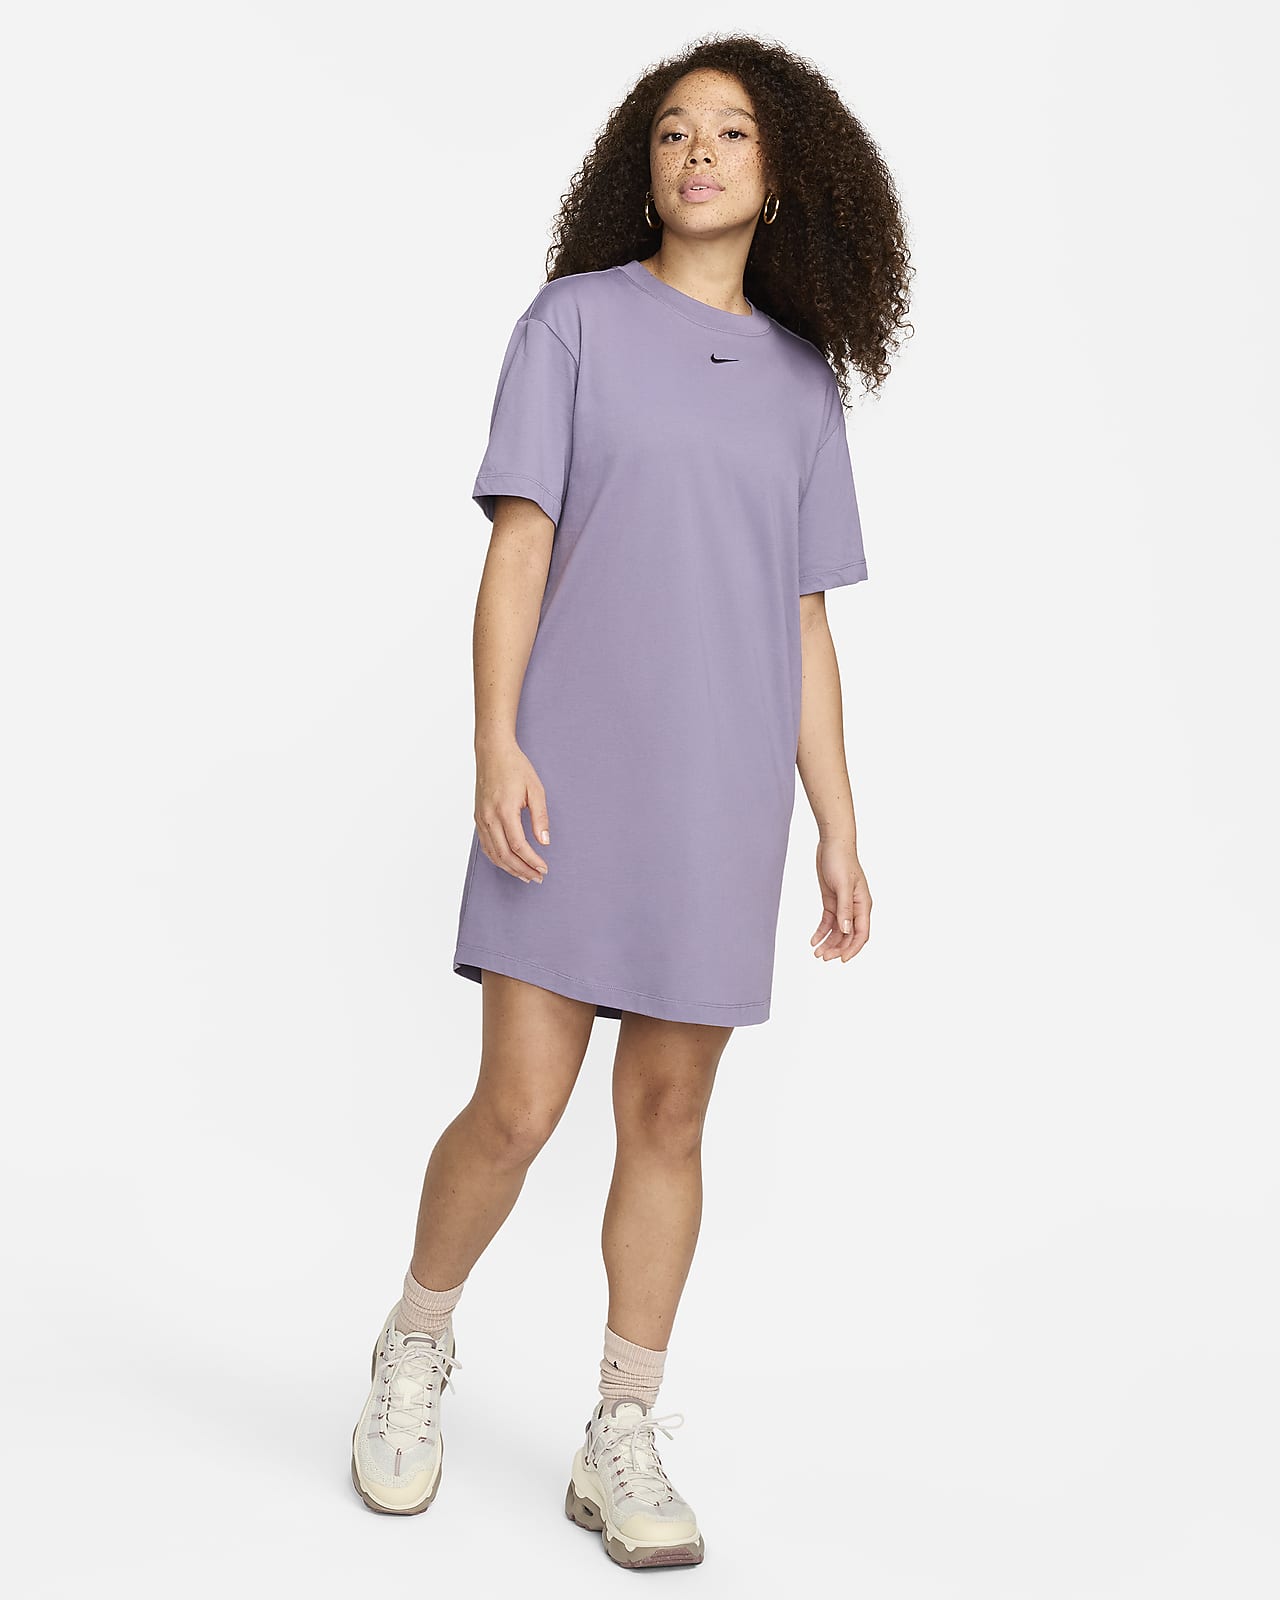 UNBRANDED Night Dress Ladies Long T Shirt, Age Group: 15 ABOVE at Rs  550/piece in Jaipur